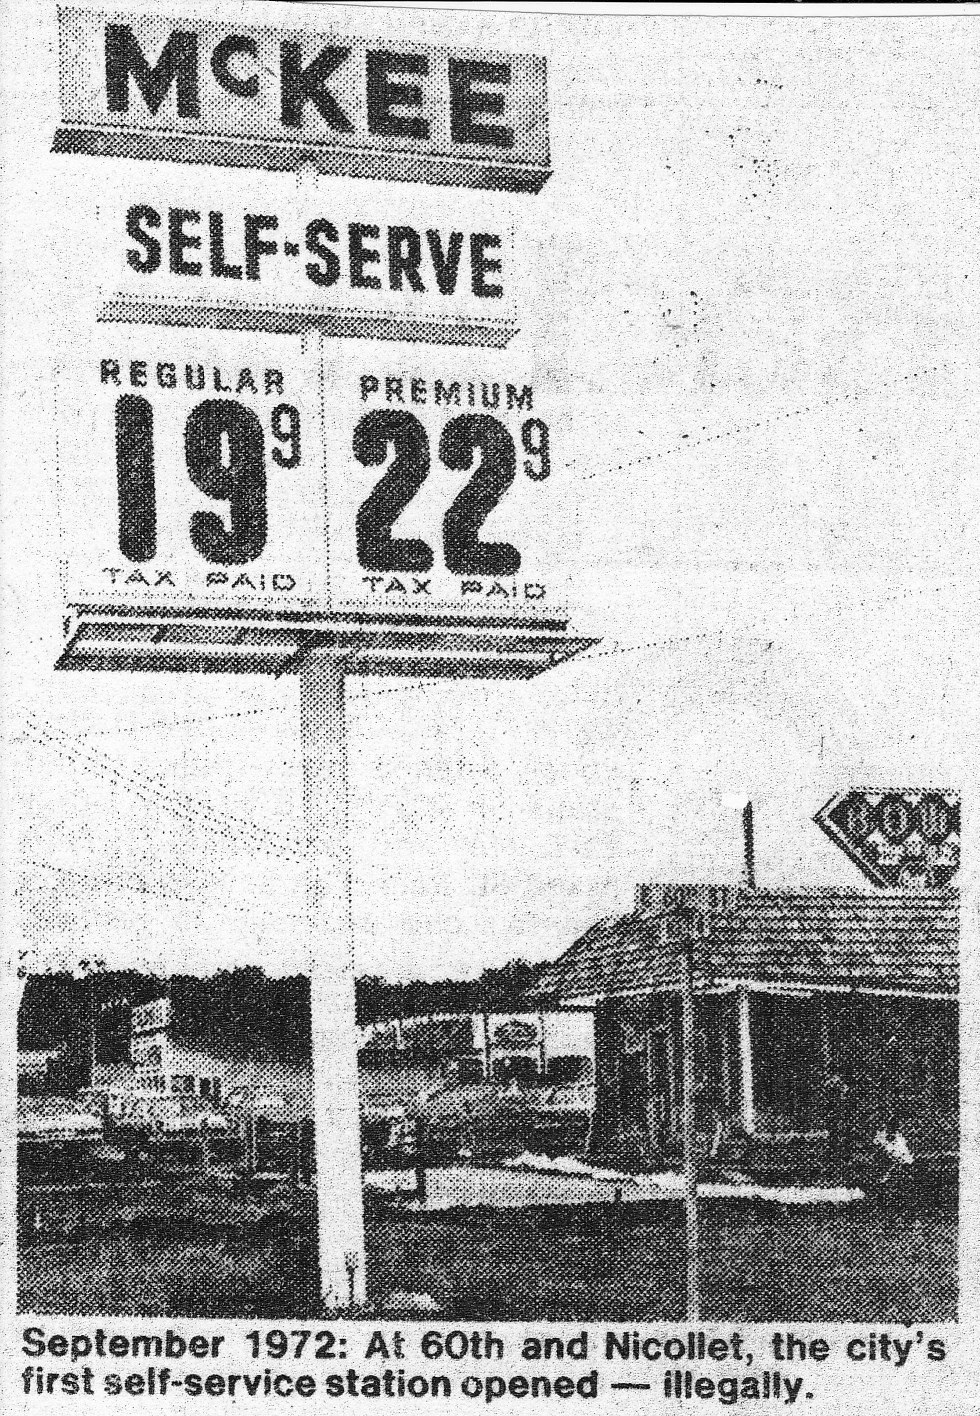 poster - Mckee SelfServe Regular Premium 9 19 22 Tax Paid Tax Paid At 60th and Nicollet, the city's first selfservice station opened illegally.